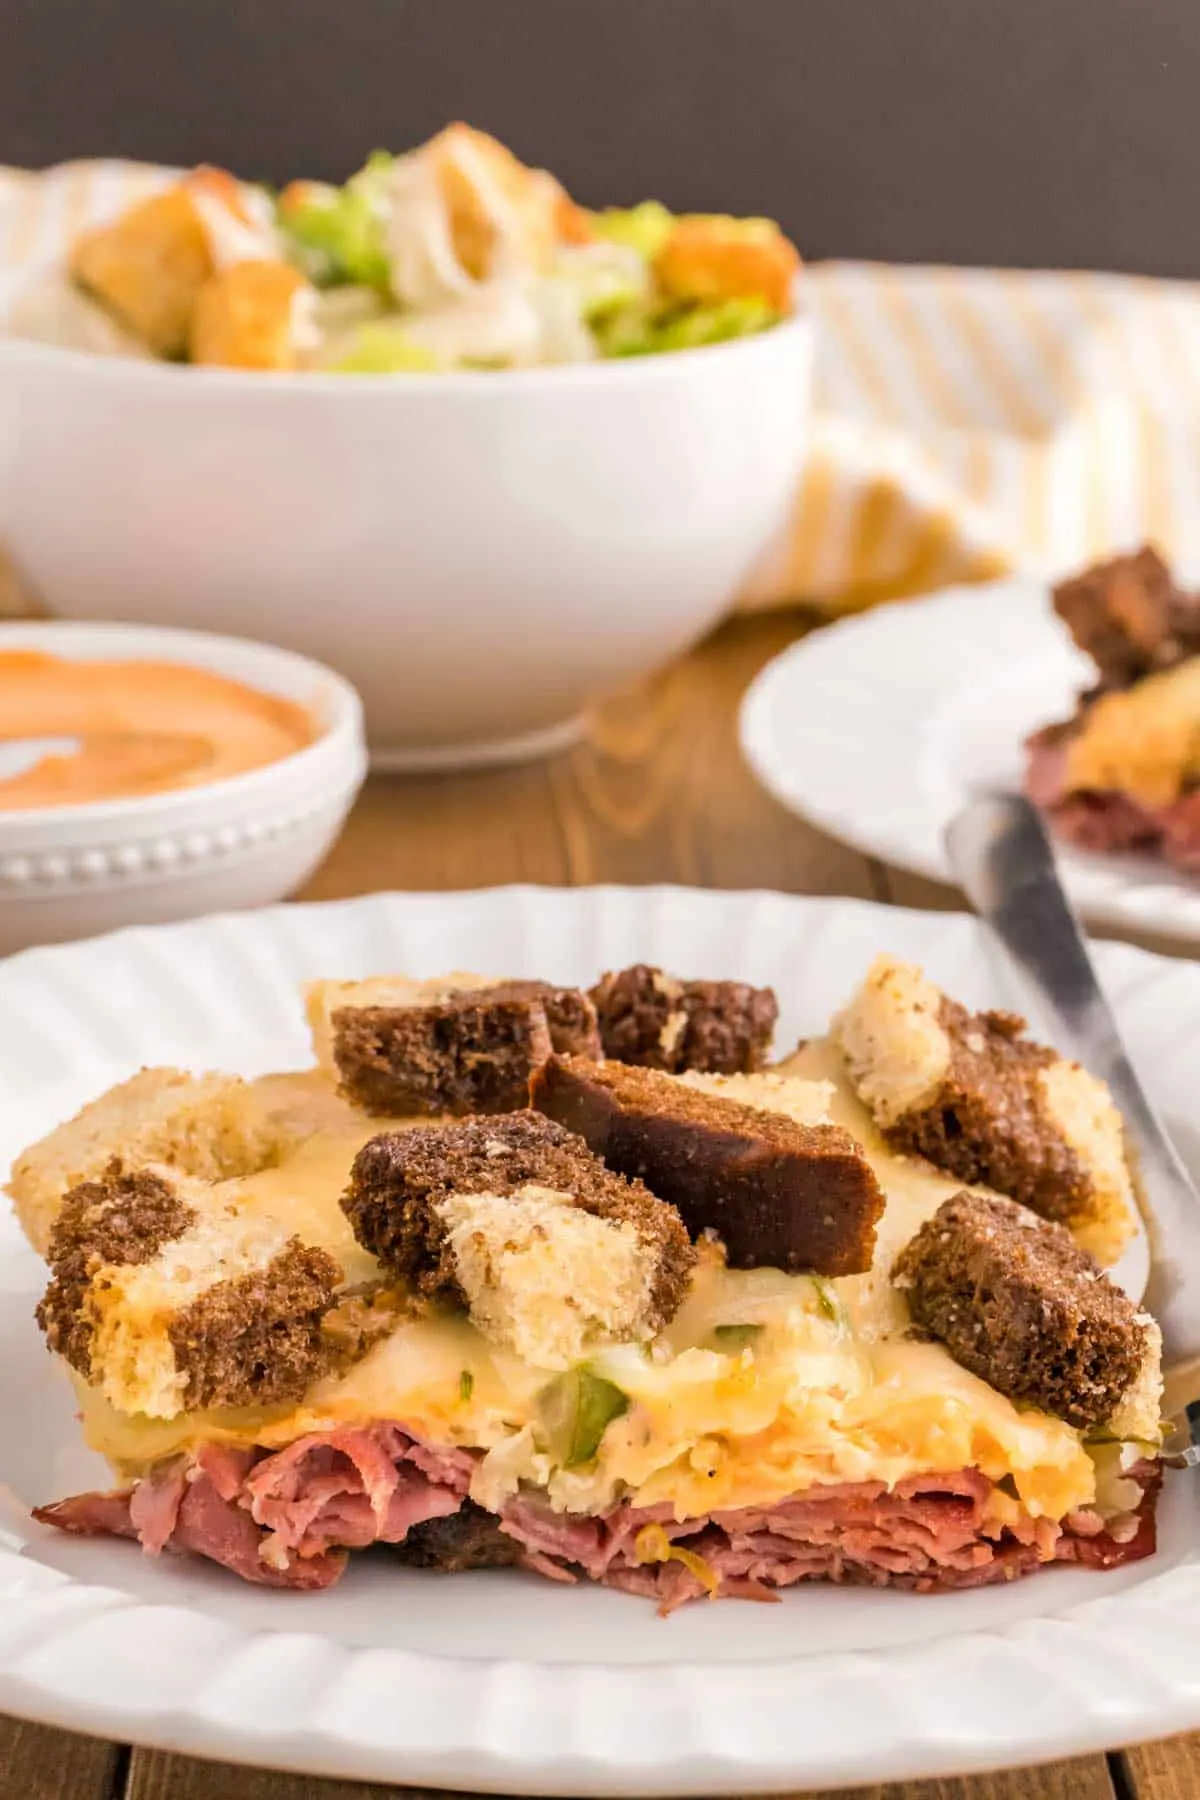 Reuben Casserole is a tasty dish loaded with cubes of rye bread, sliced corned beef, sauerkraut, dill pickles, Swiss cheese and Thousand Island dressing.